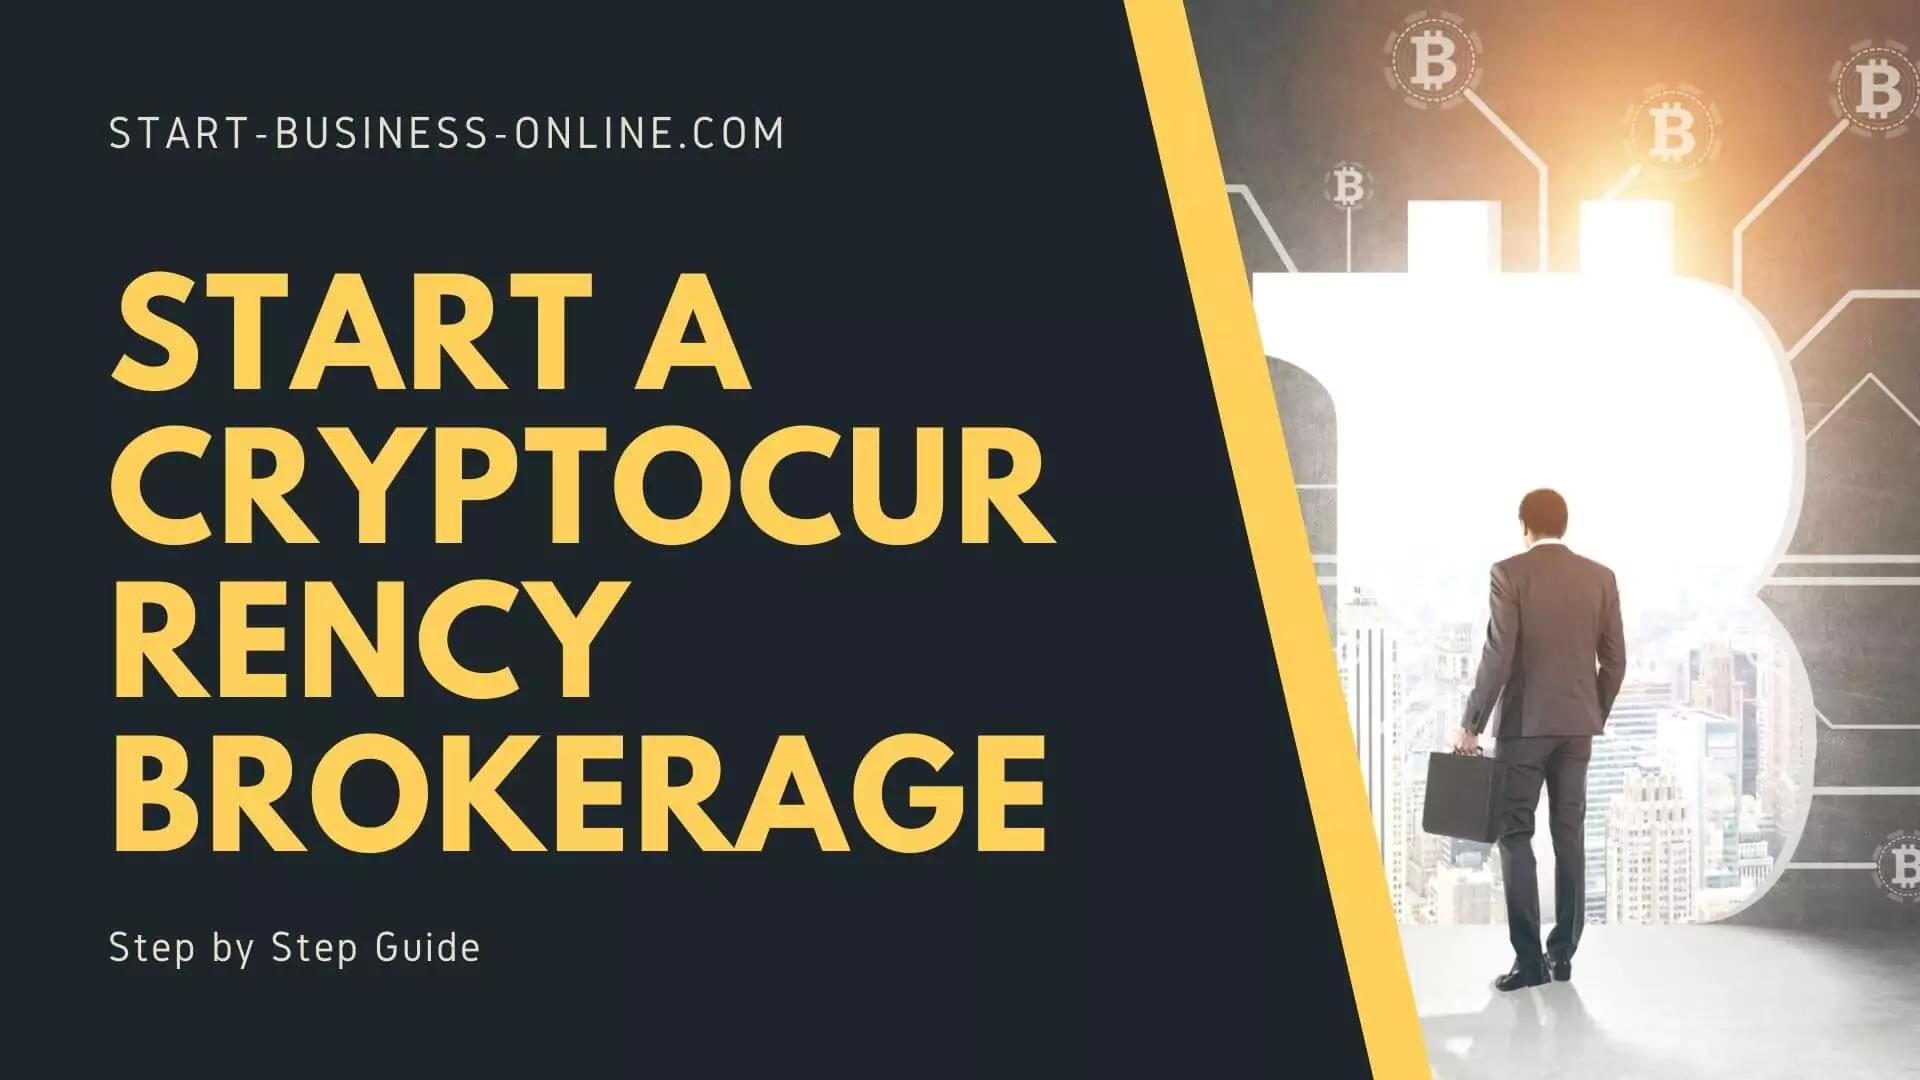 Start a Cryptocurrency Brokerage Business